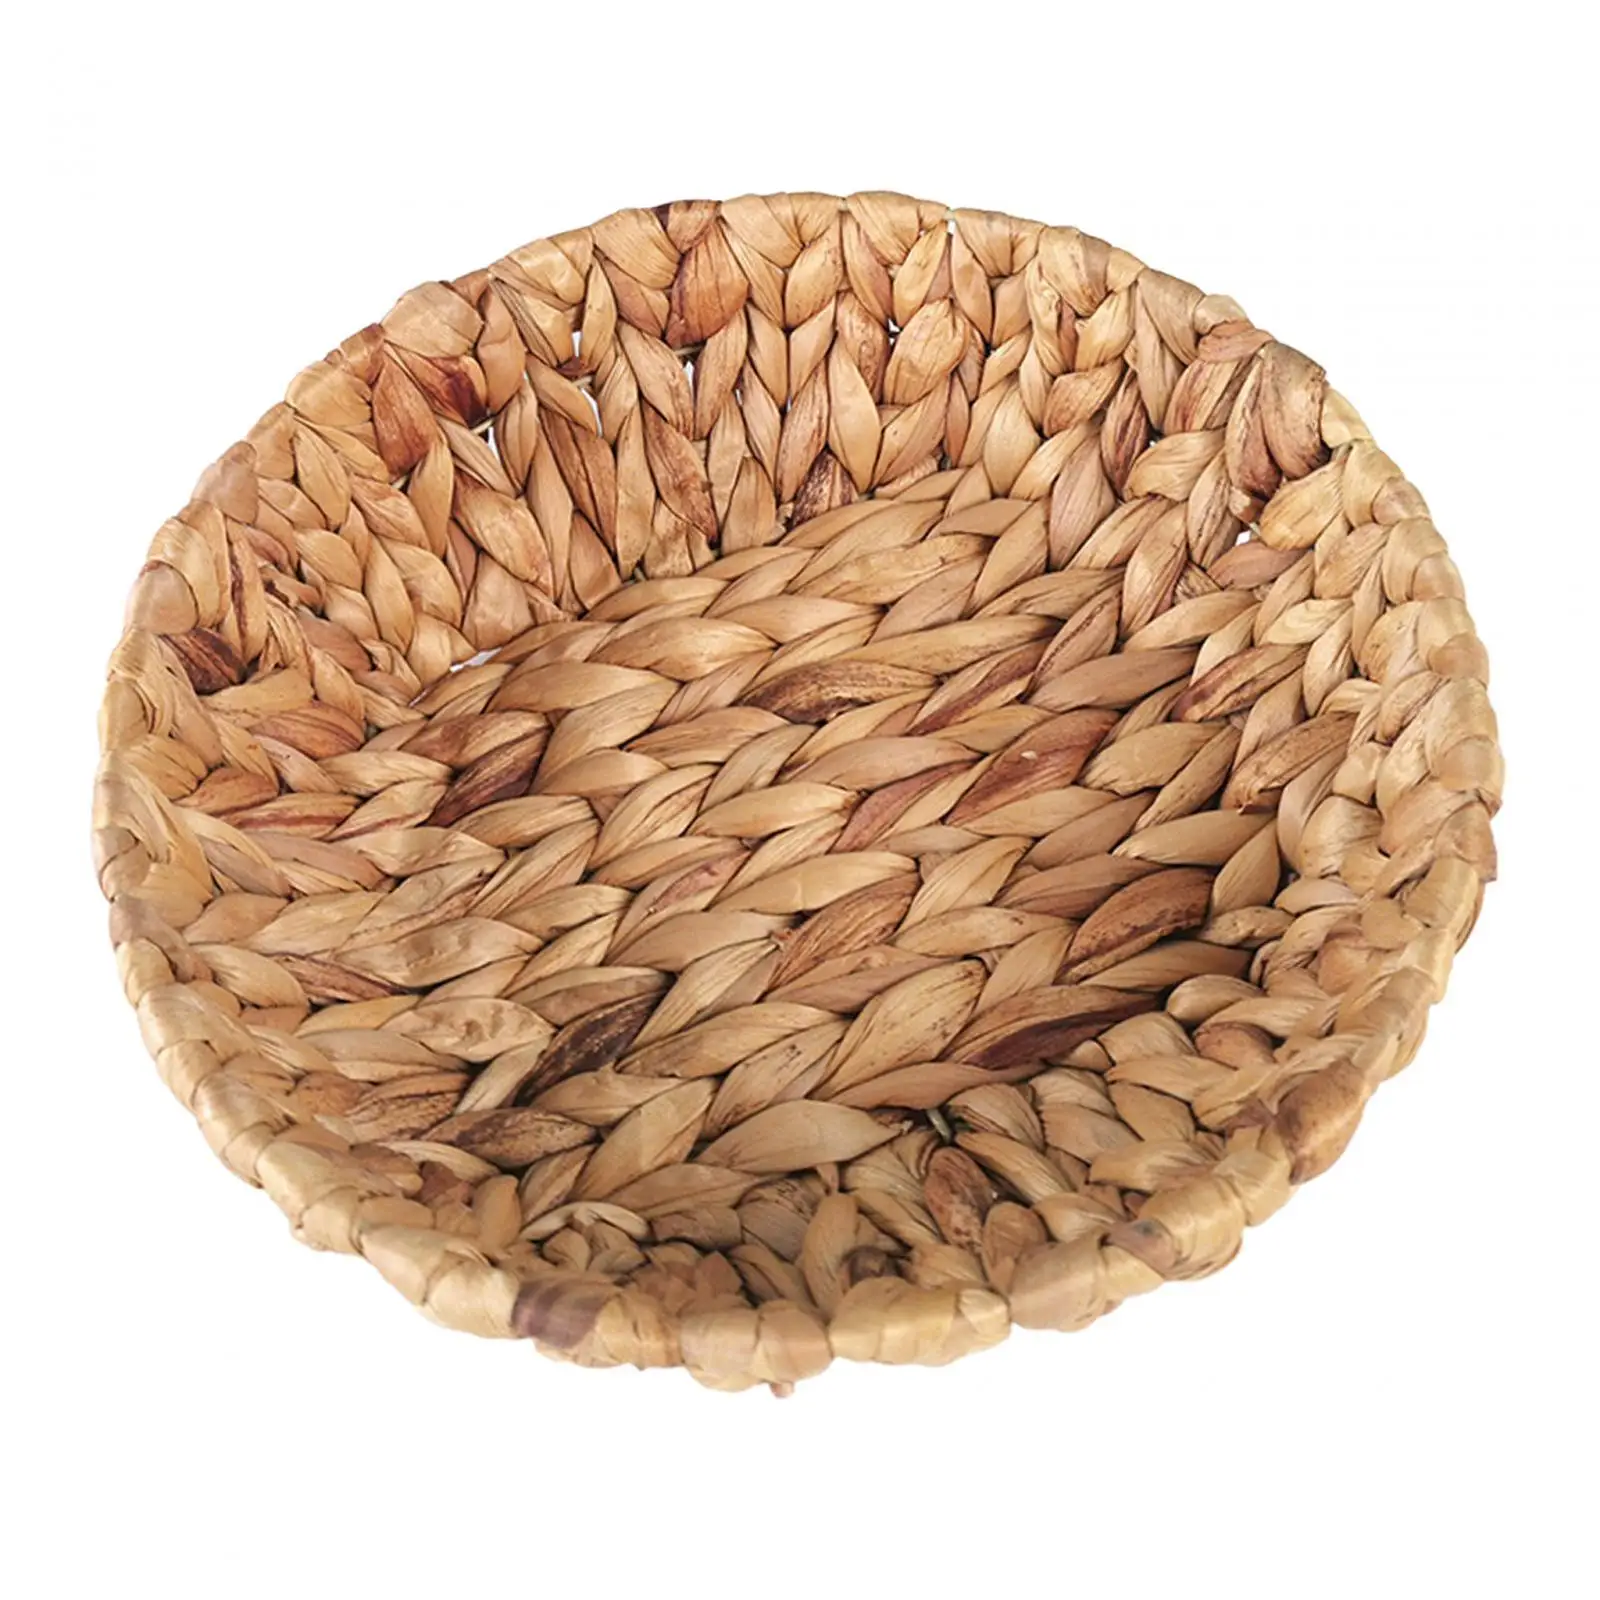 Round Grass Storage Bin, Water Hyacinth Storage Basket, Wicker Serving Tray for Arts and Crafts Coffee Table Tea Party